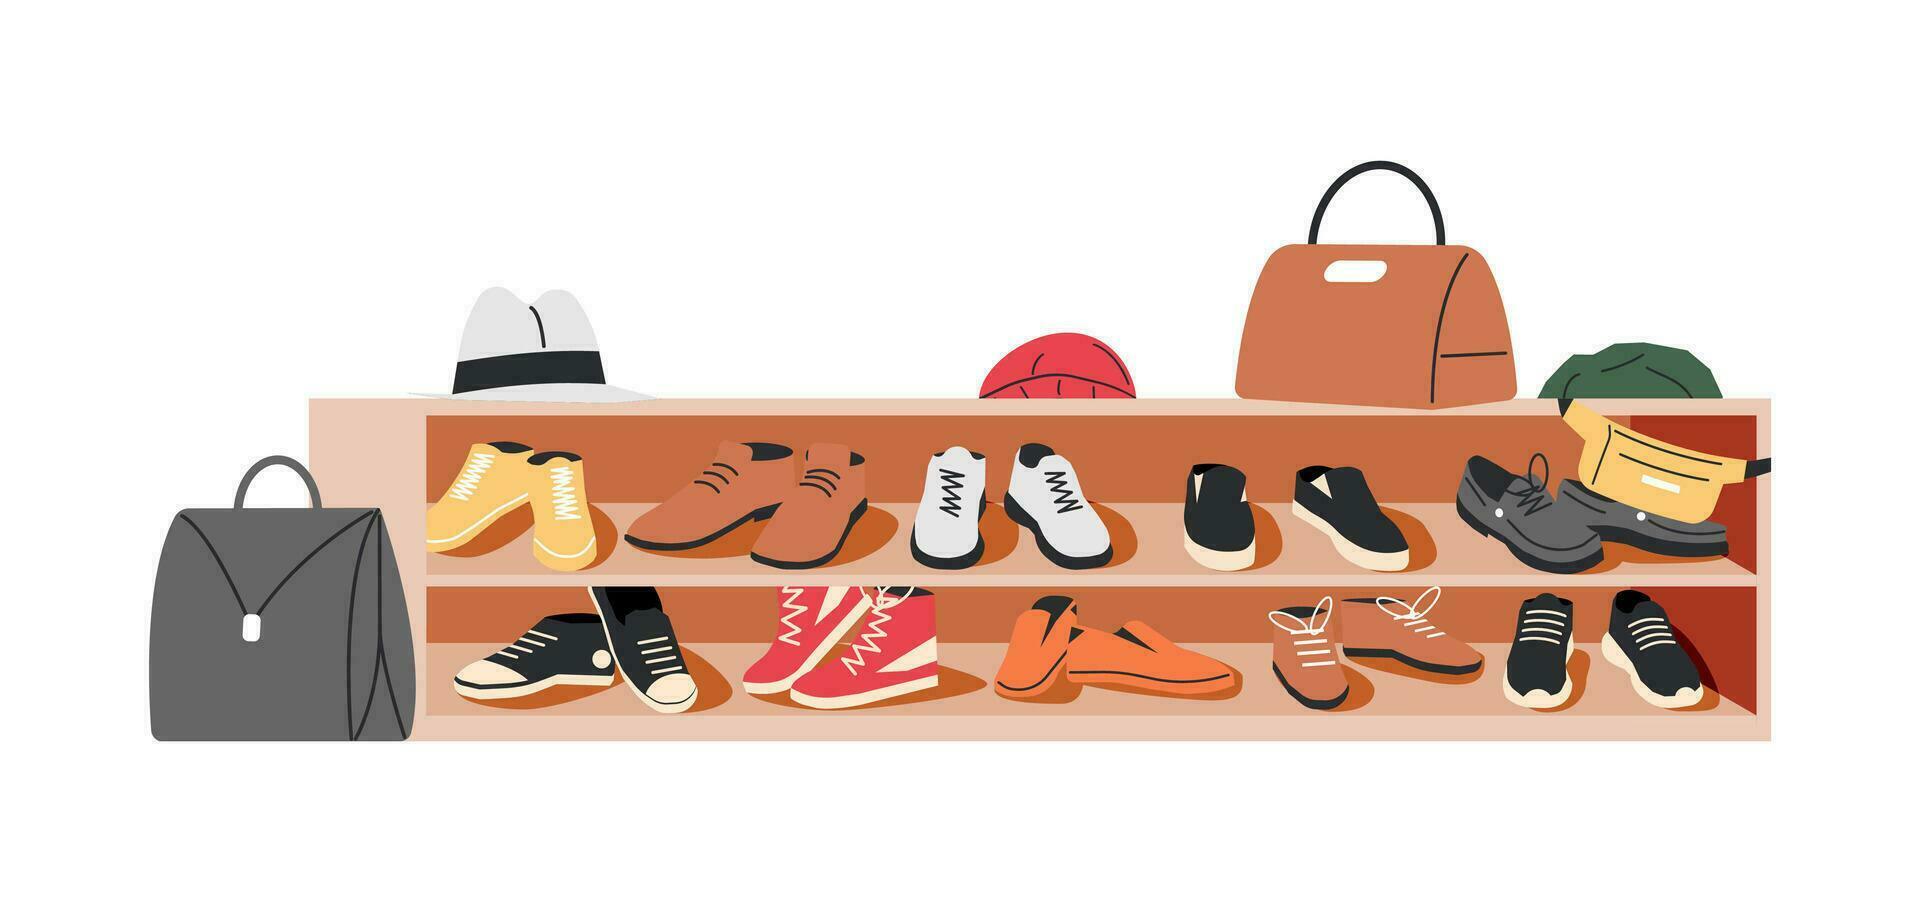 Hallway Seat Cabinet With Shoes Isolated. Foyer Entrance Seat with Footwear, Bags and Hats. Men and Woman Footwear Collection. Different Male and Female Accessories. Cartoon Flat Vector Illustration